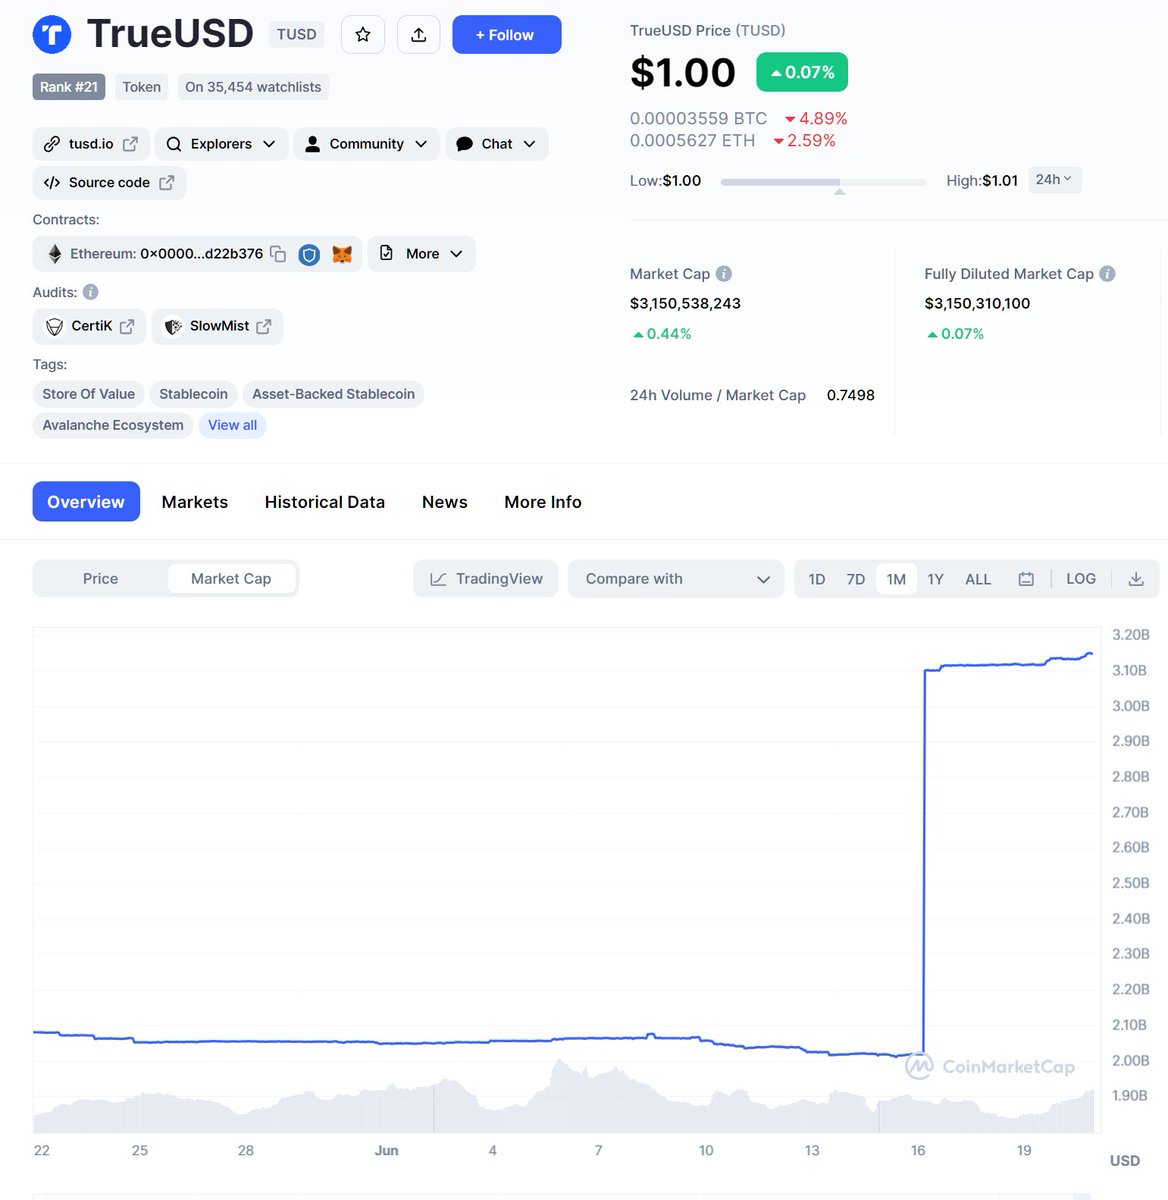 Binance allows 0 fee trading for TUSD
Binance gets sued by SEC.
TrueUSD stops attestations.
TrueUSD prints a billion tokens out of thin air.
Bitcoin suddenly skyrockets.

Here's the pump and dump I warned you about.